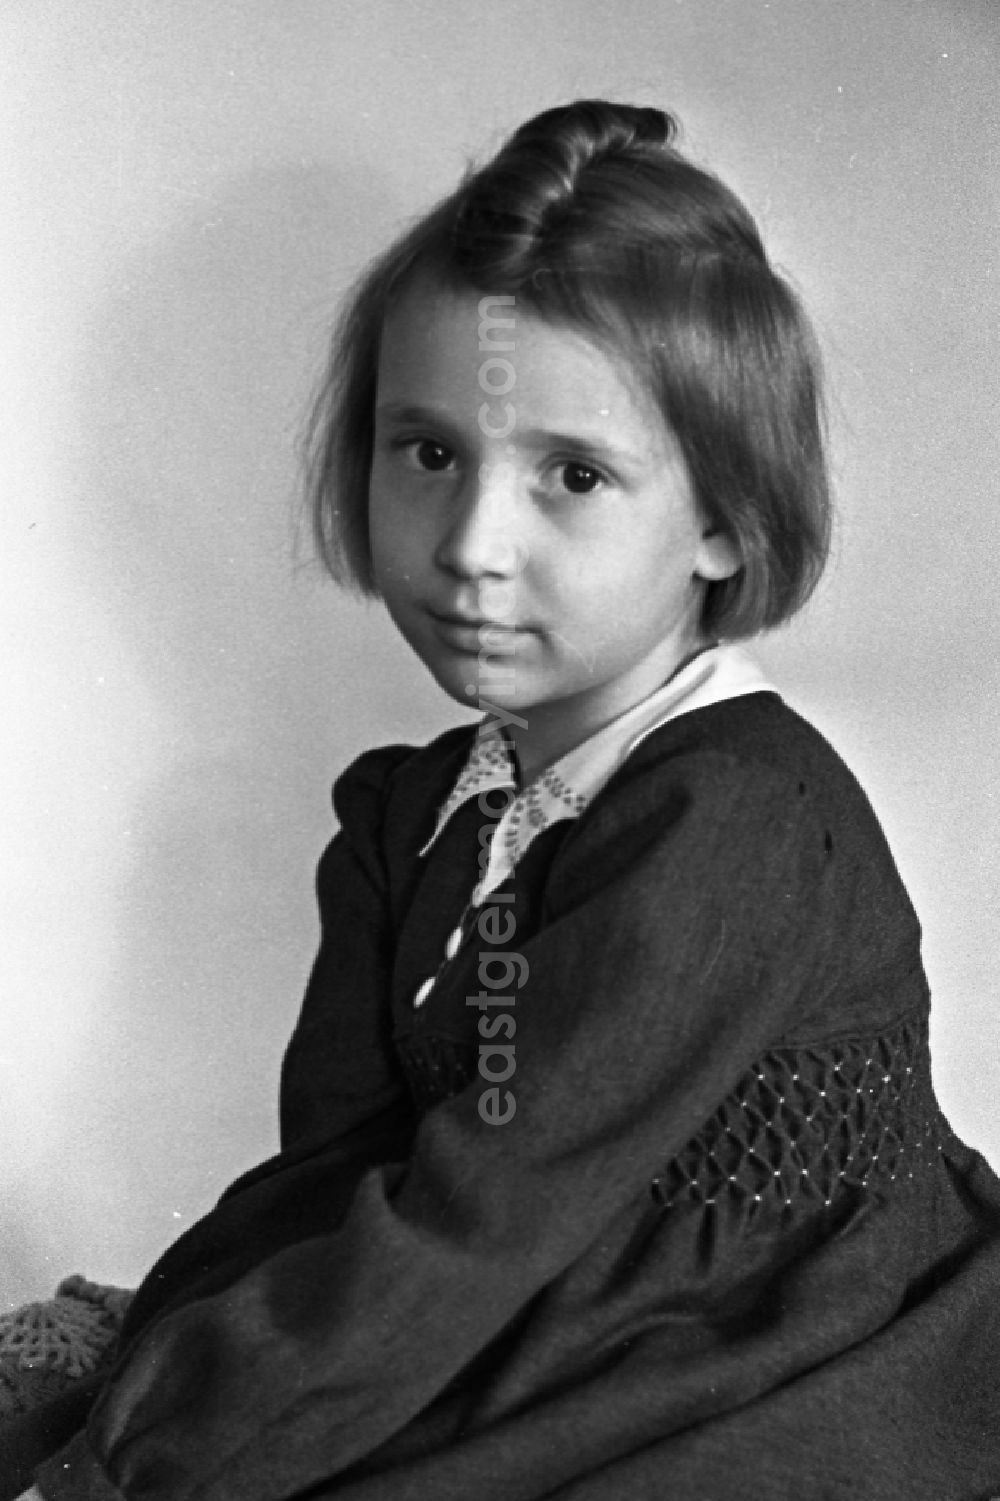 Merseburg: Little girl in the portrait in Merseburg in the federal state Saxony-Anhalt in Germany